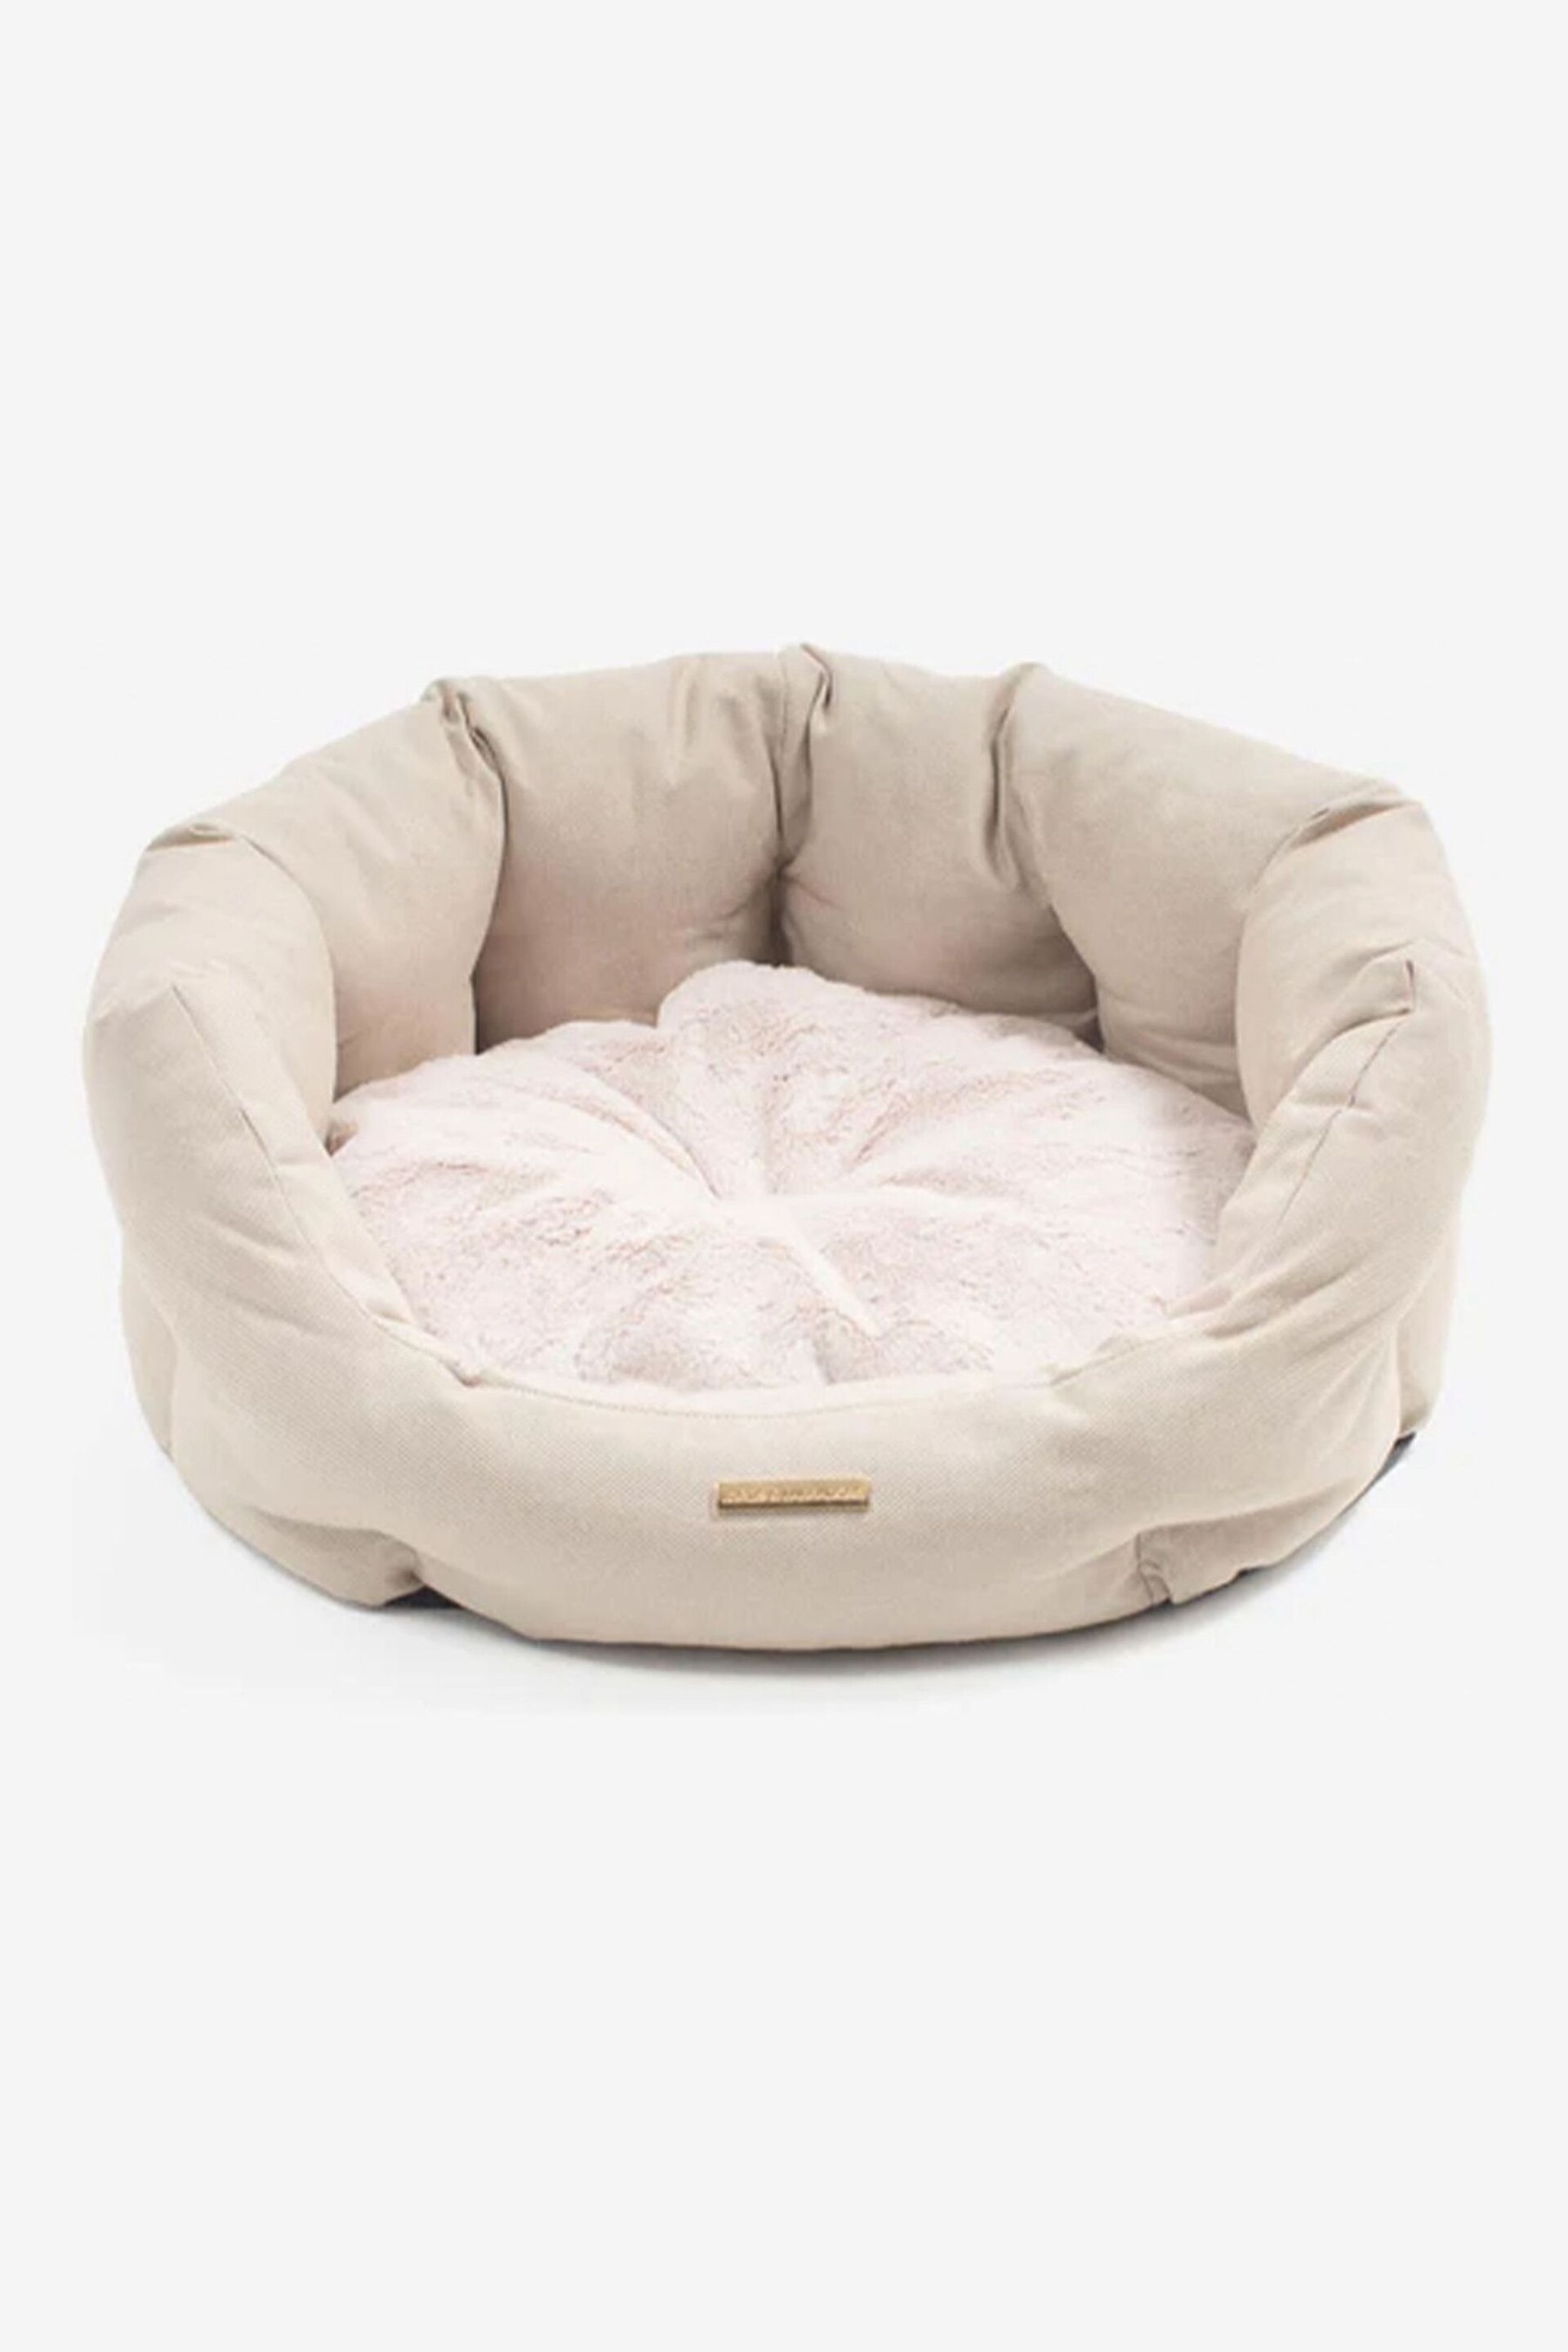 Lords and Labradors Natural Essentials Twill Oval Dog Bed - Image 4 of 5